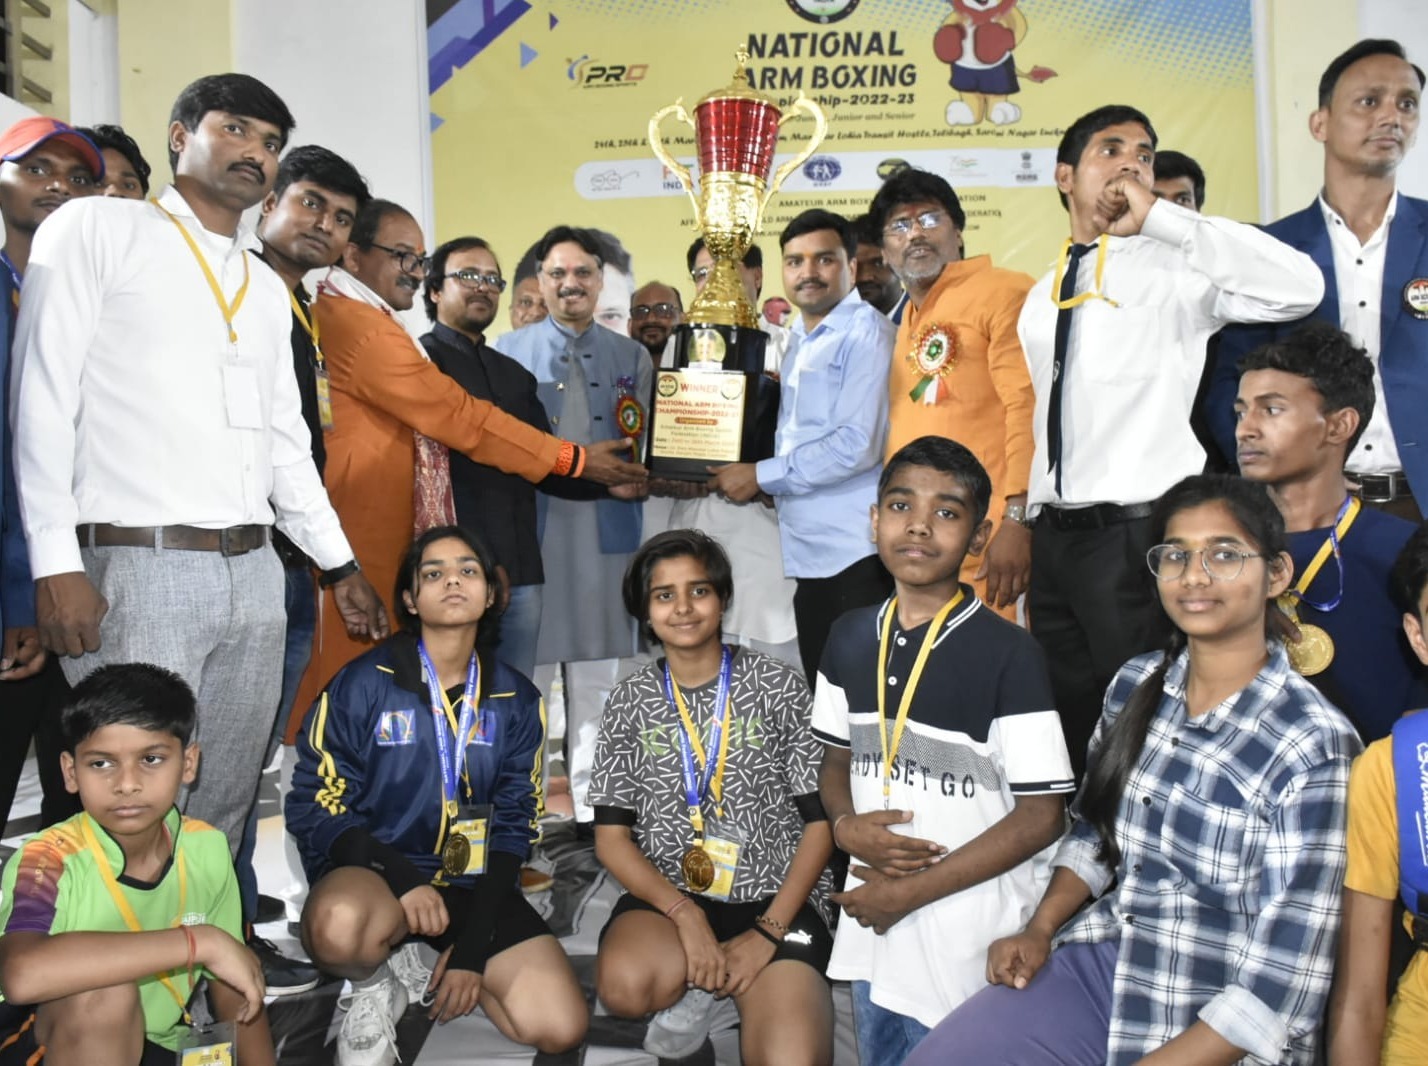 Sarojini Nagar MLA Rajeshwar Singh Encourages National Arm Boxing Championship Participants, Says – “Your Self-Confidence & Excellent Performance Are Pride Of Country”